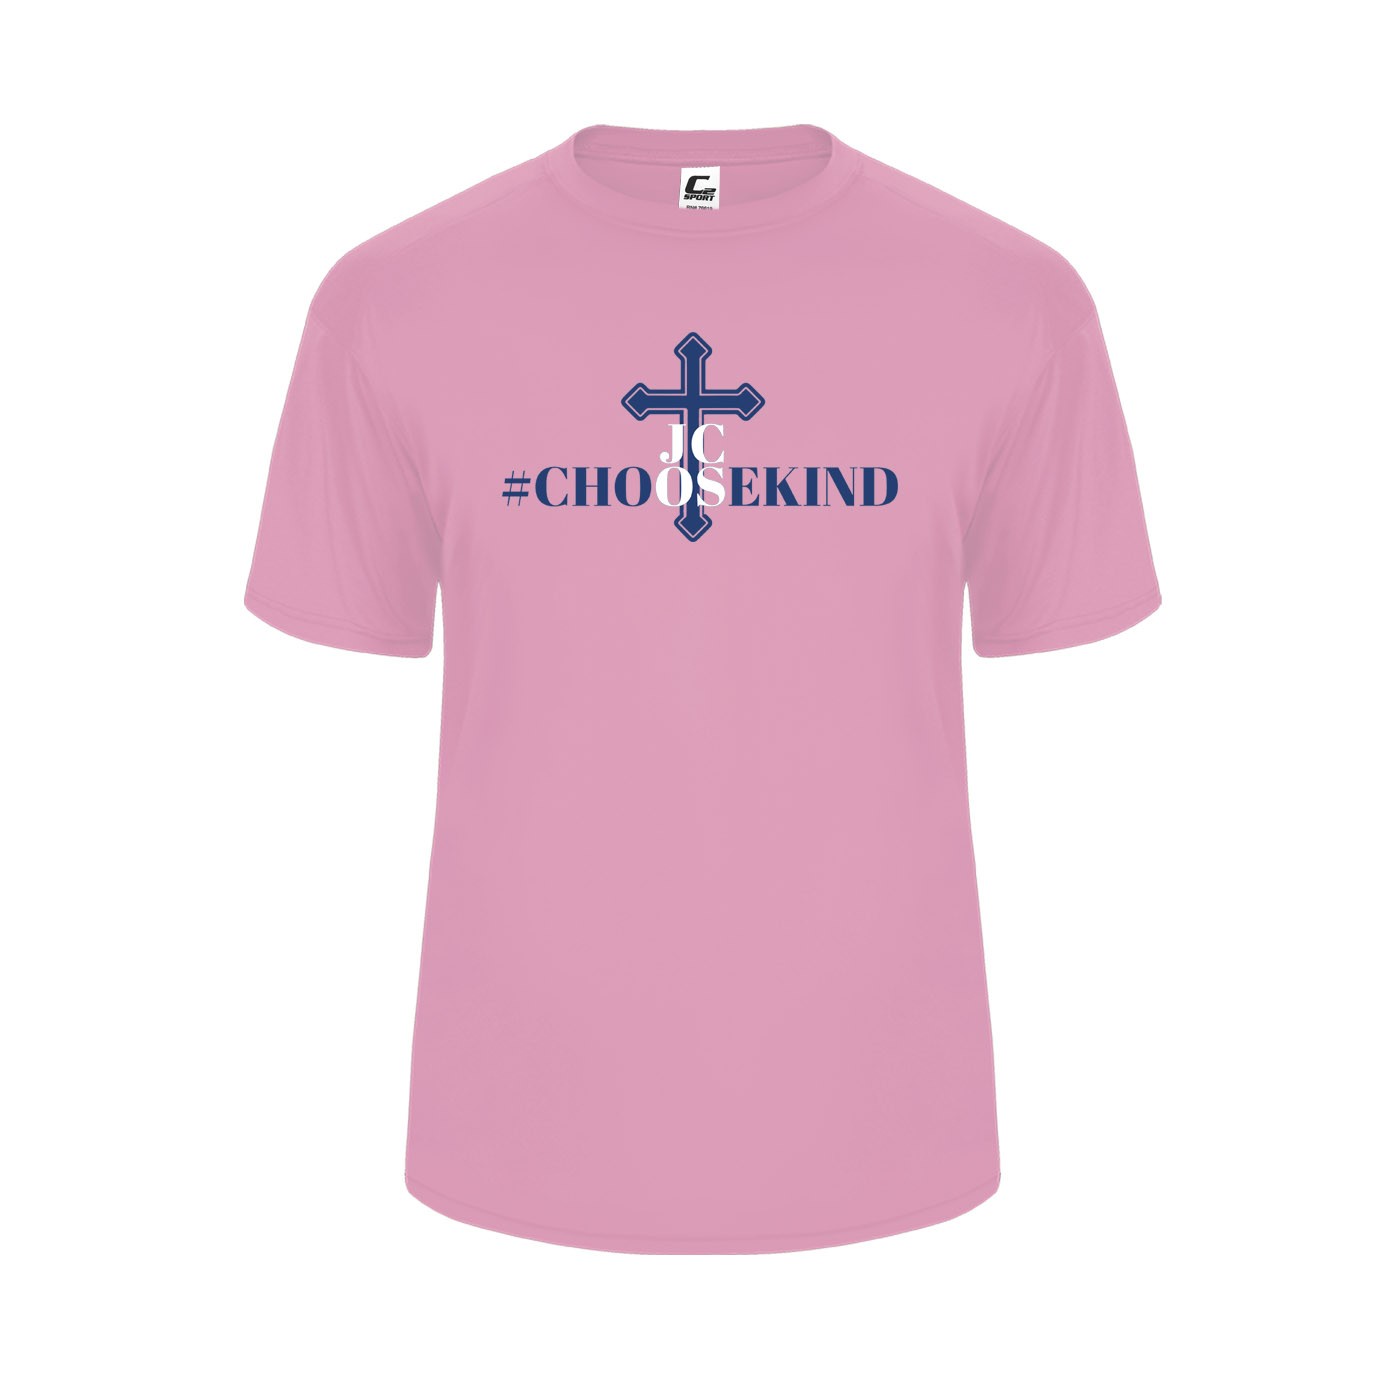 JCOS Staff S/S Performance T-Shirt w/ Choose Kindness Logo #F15-F16 - Please Allow 3-4 Weeks for Delivery